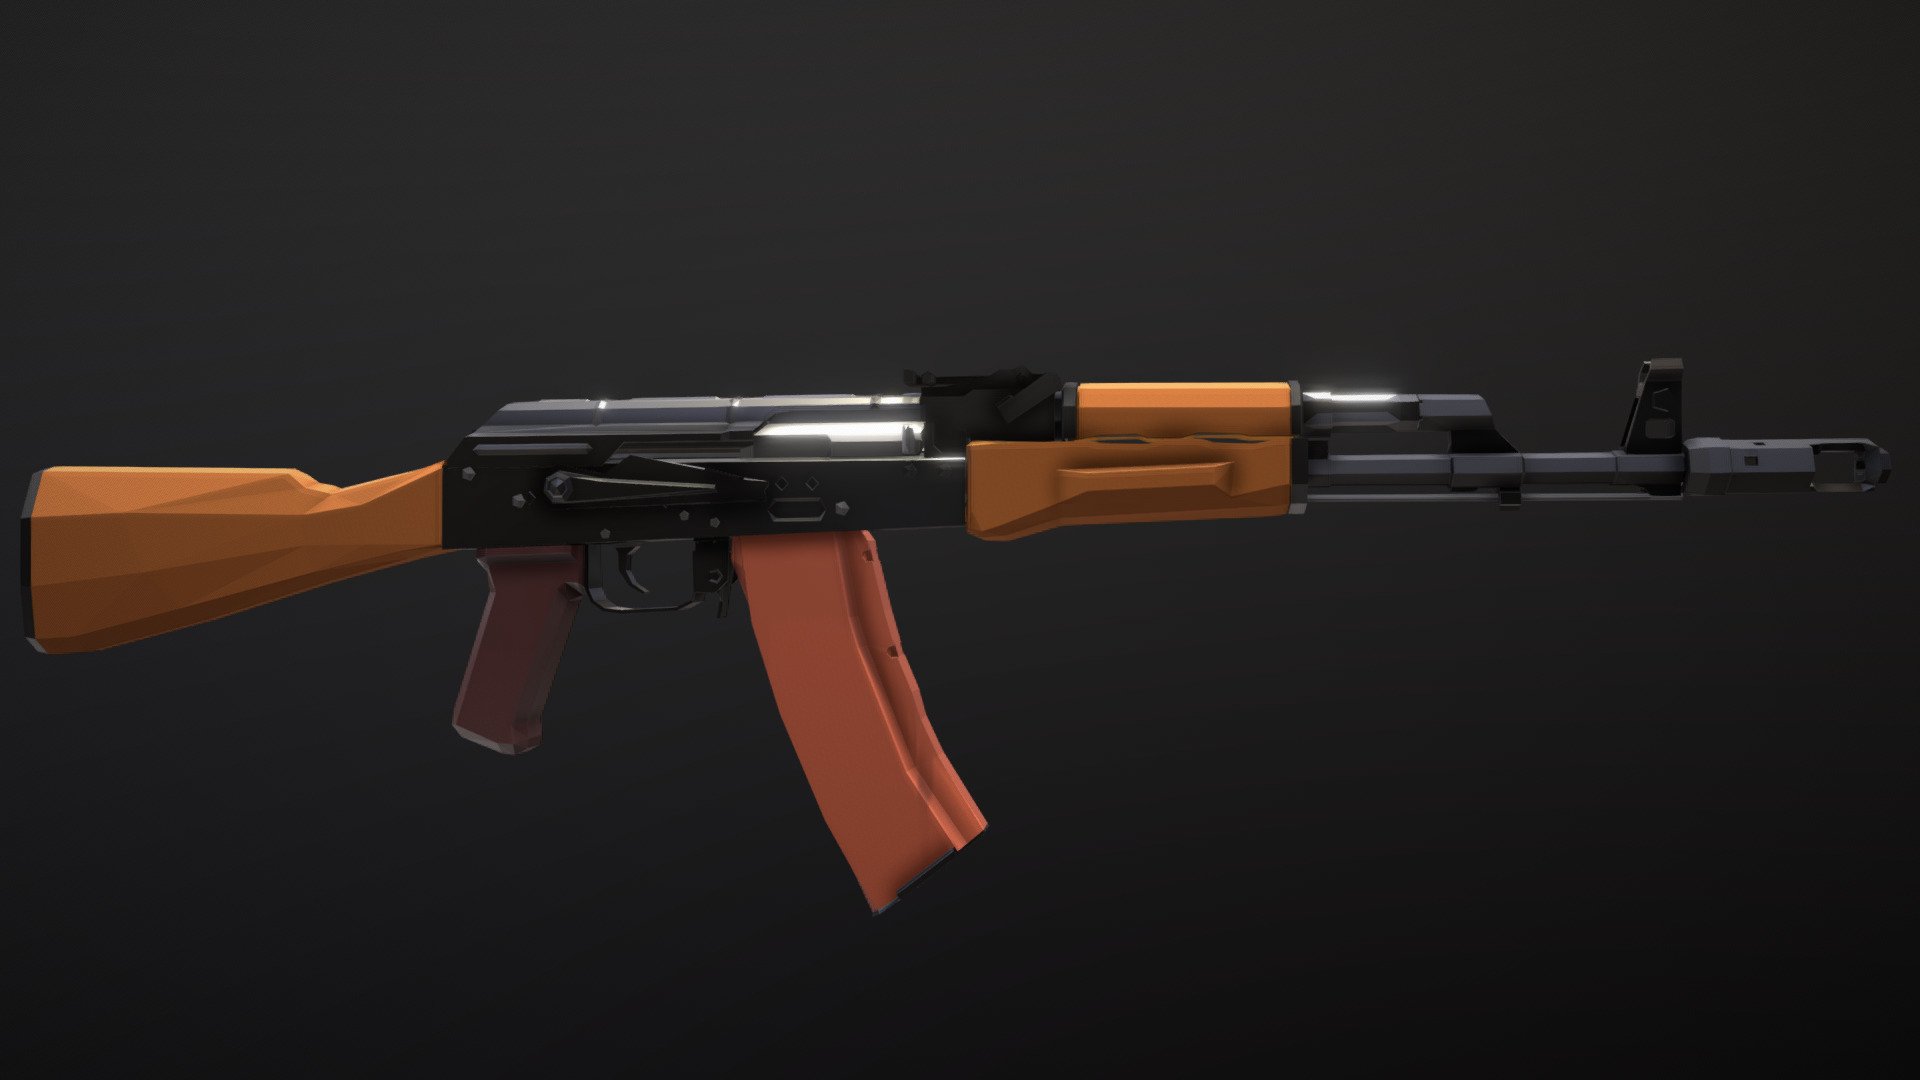 Low-Poly model of the AK-74, a variant derived from the AKM, chambered in 5.45x39mm. includes 6B20 muzzle brake 3d model